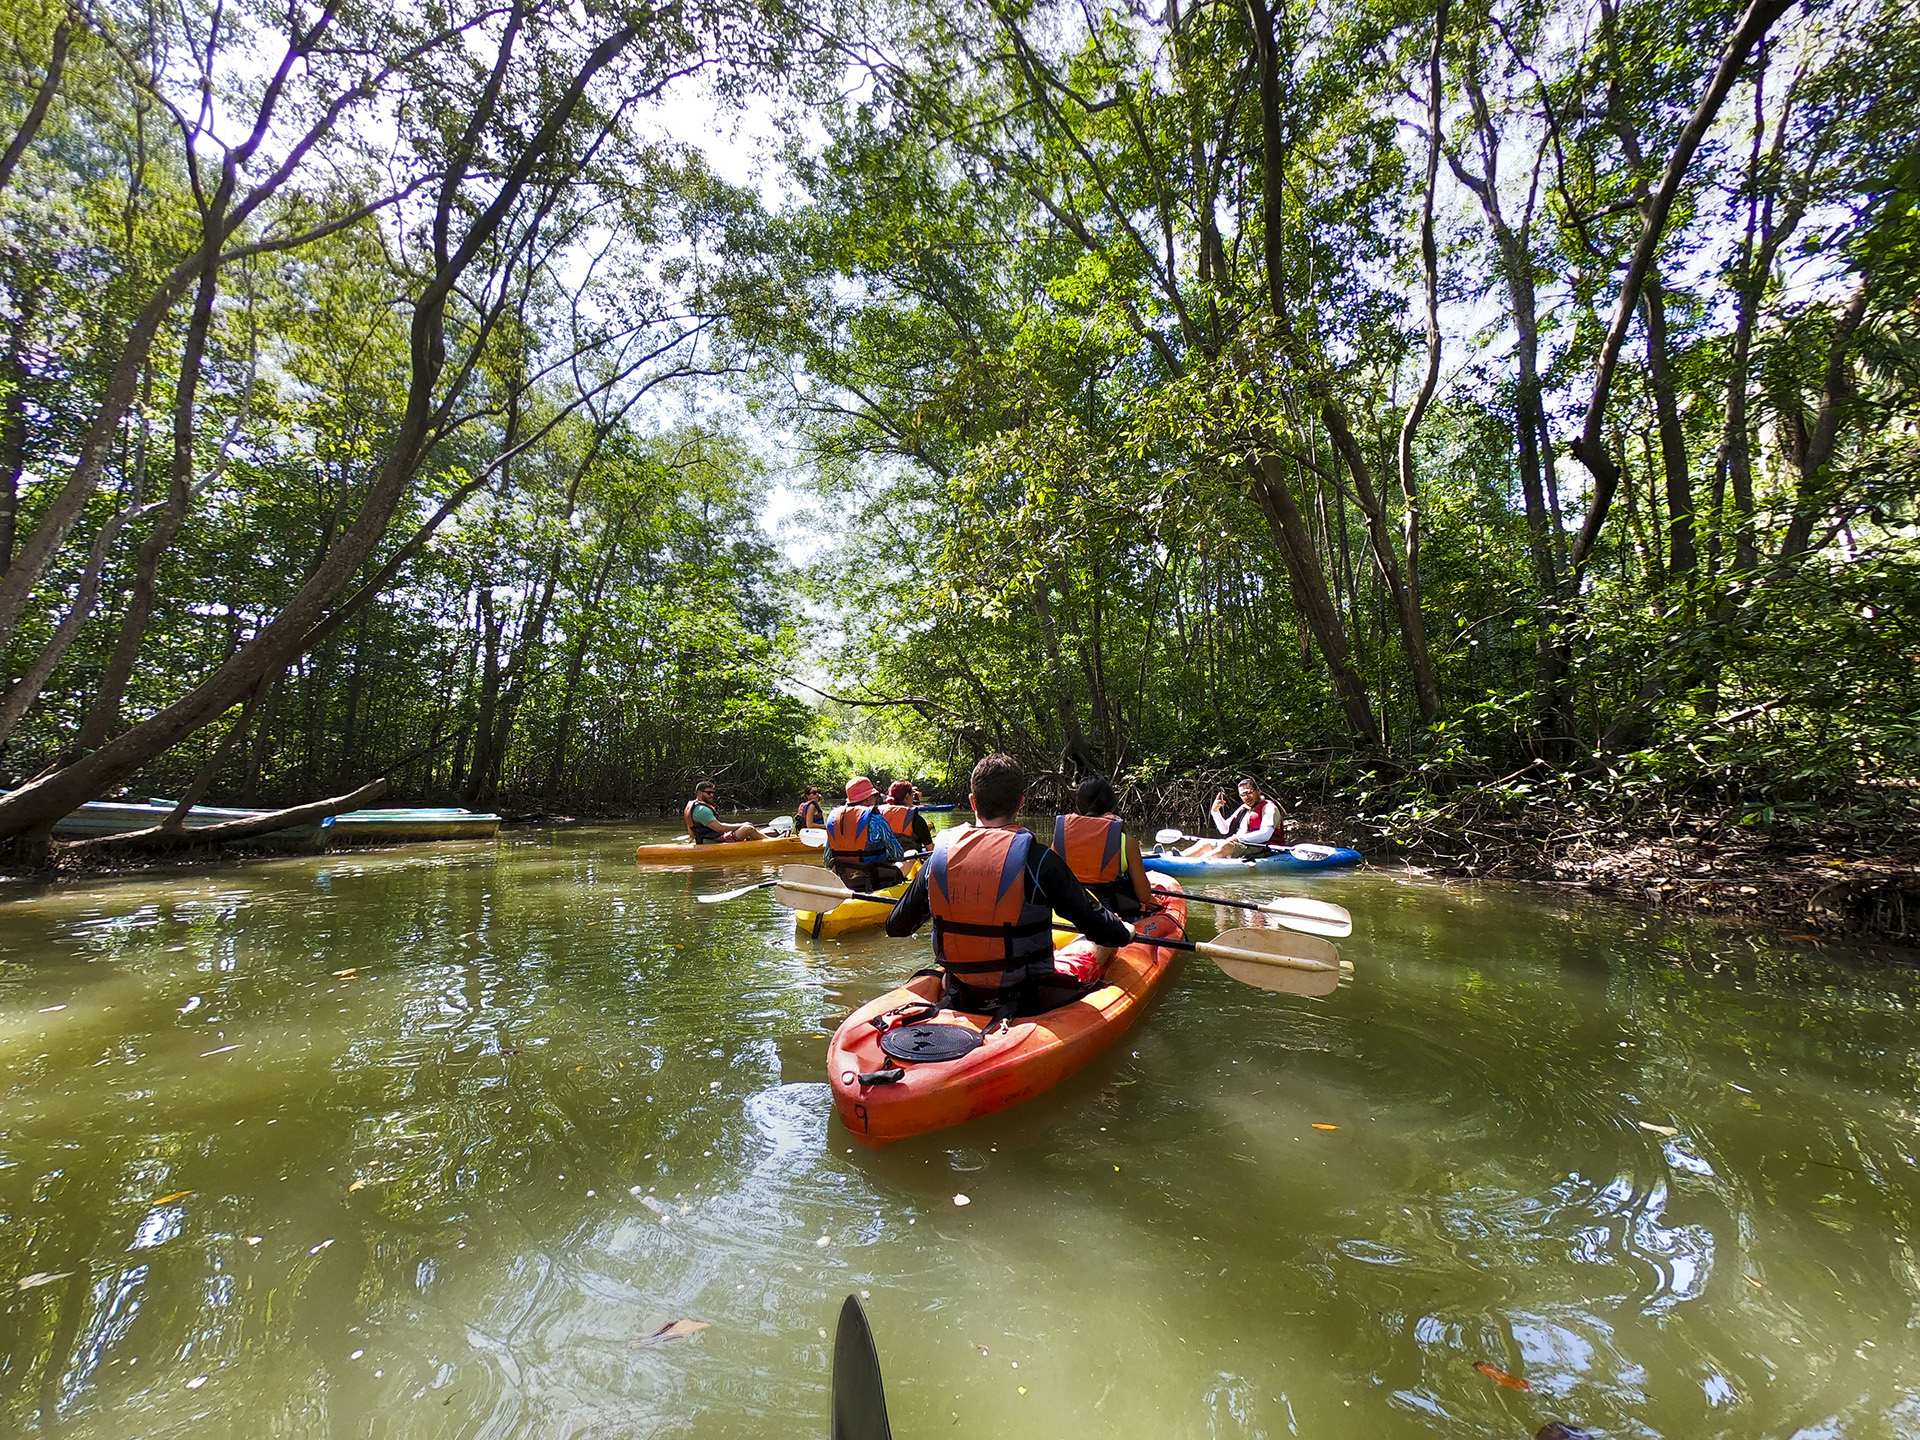 A group of kayakers navigating a serene and verdant forest waterway in Costa Rica.